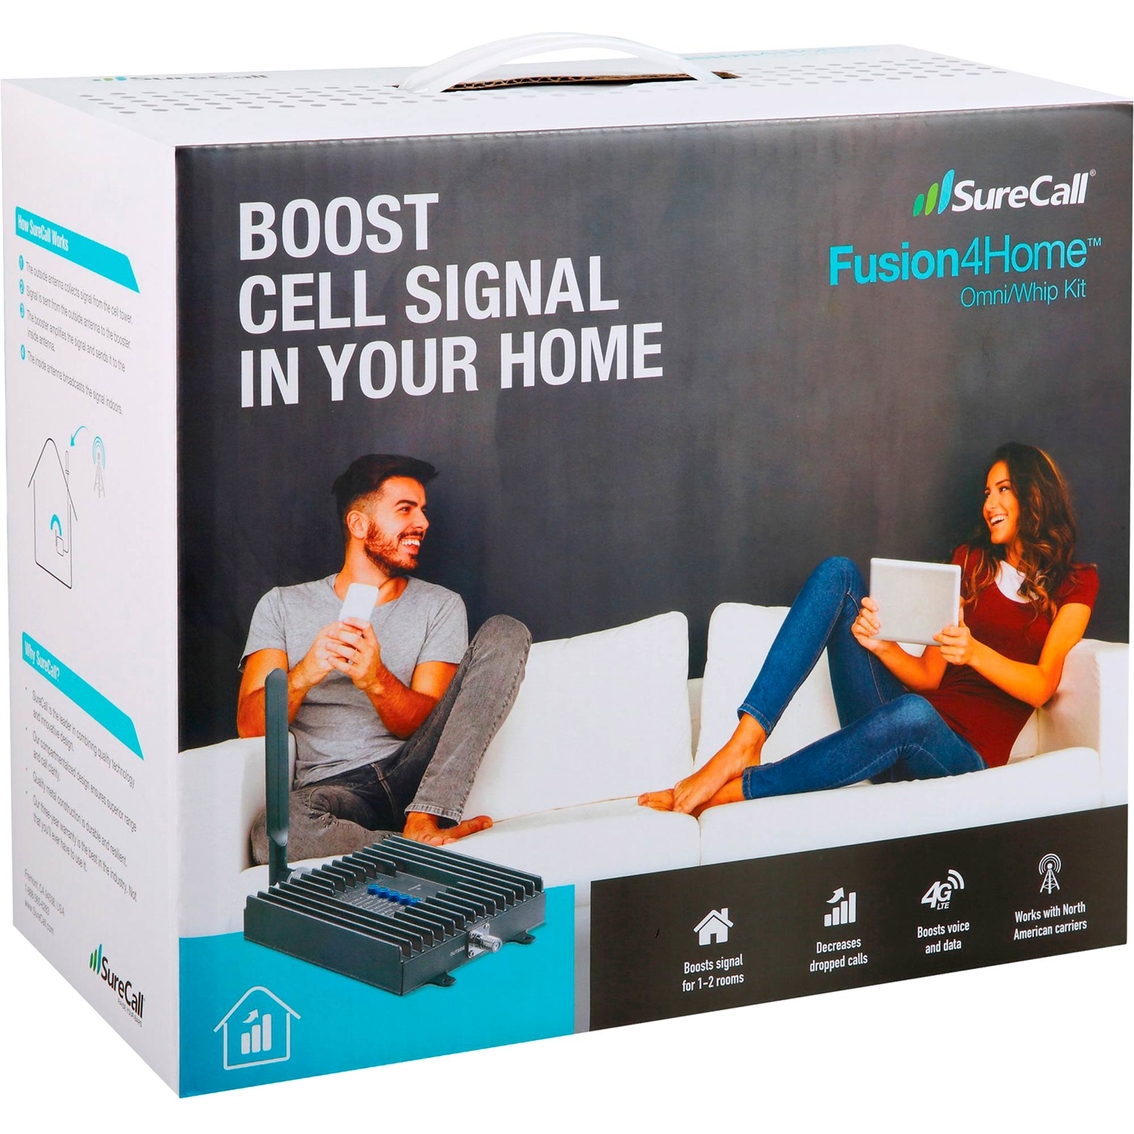 SureCall Fusion4Home Omni and Whip Kit - Image 1 of 7